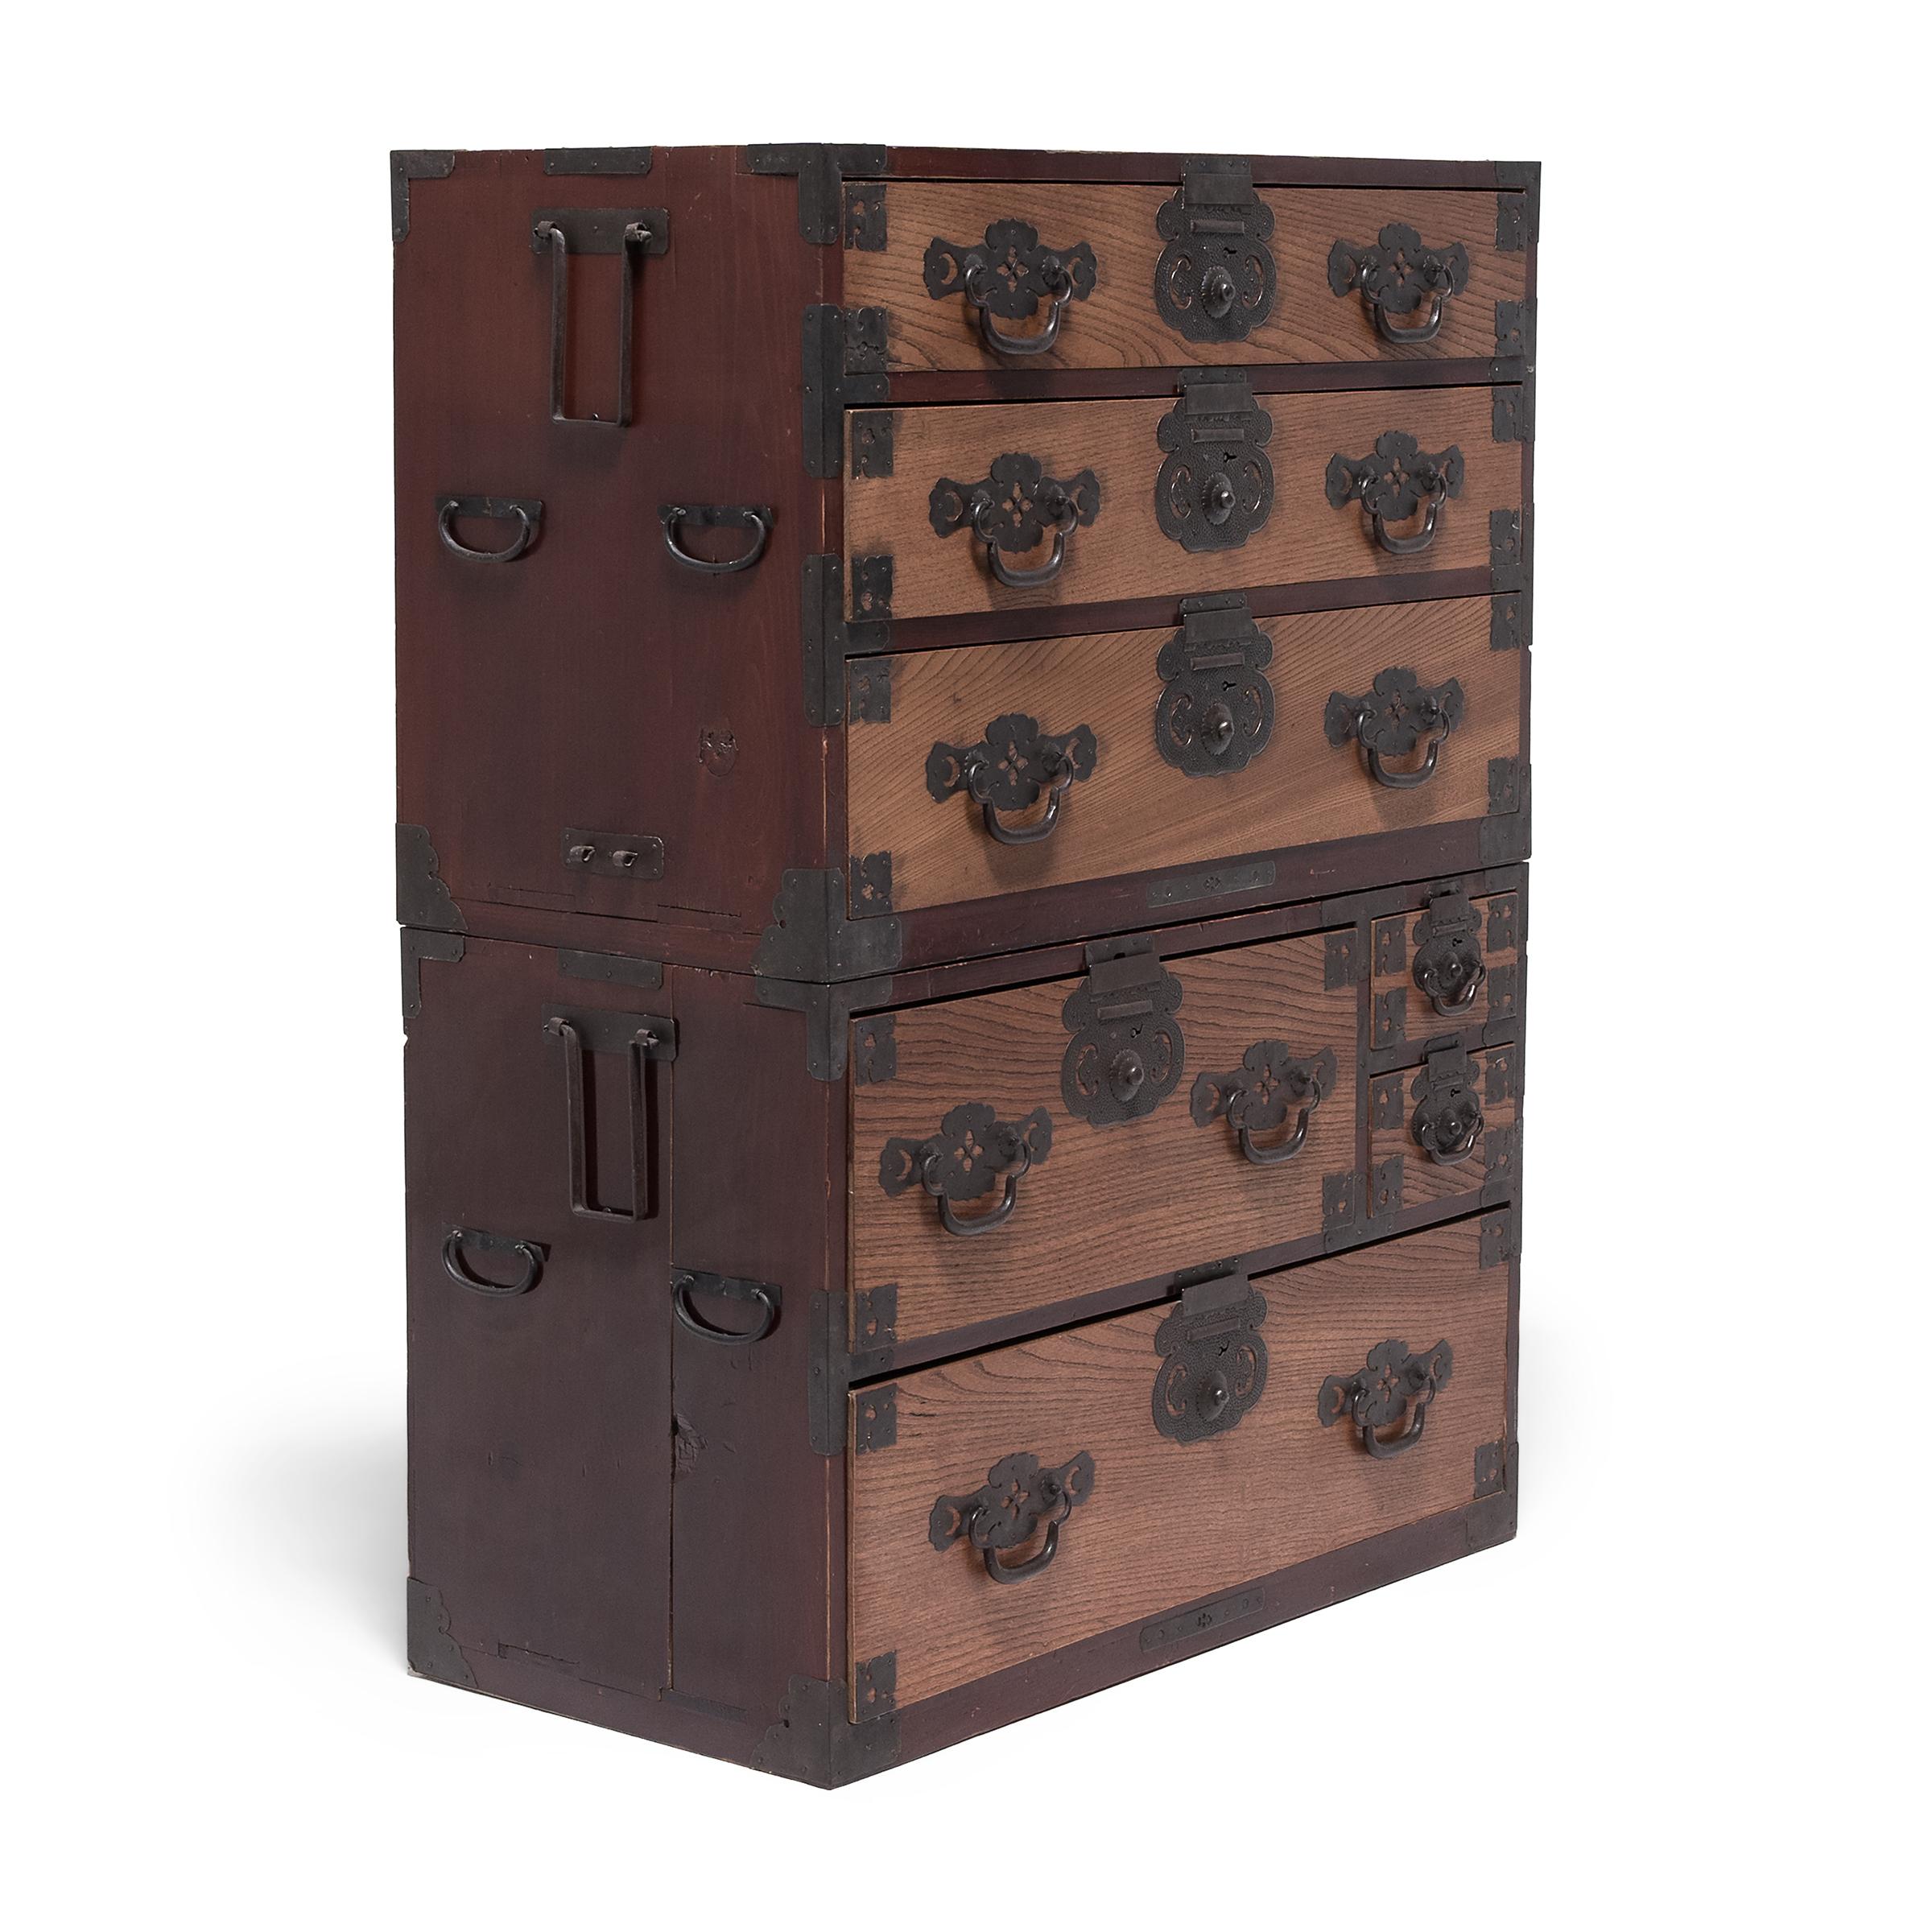 Lacquered Japanese Matsumoto Stacking Tansu Chest, C. 1900